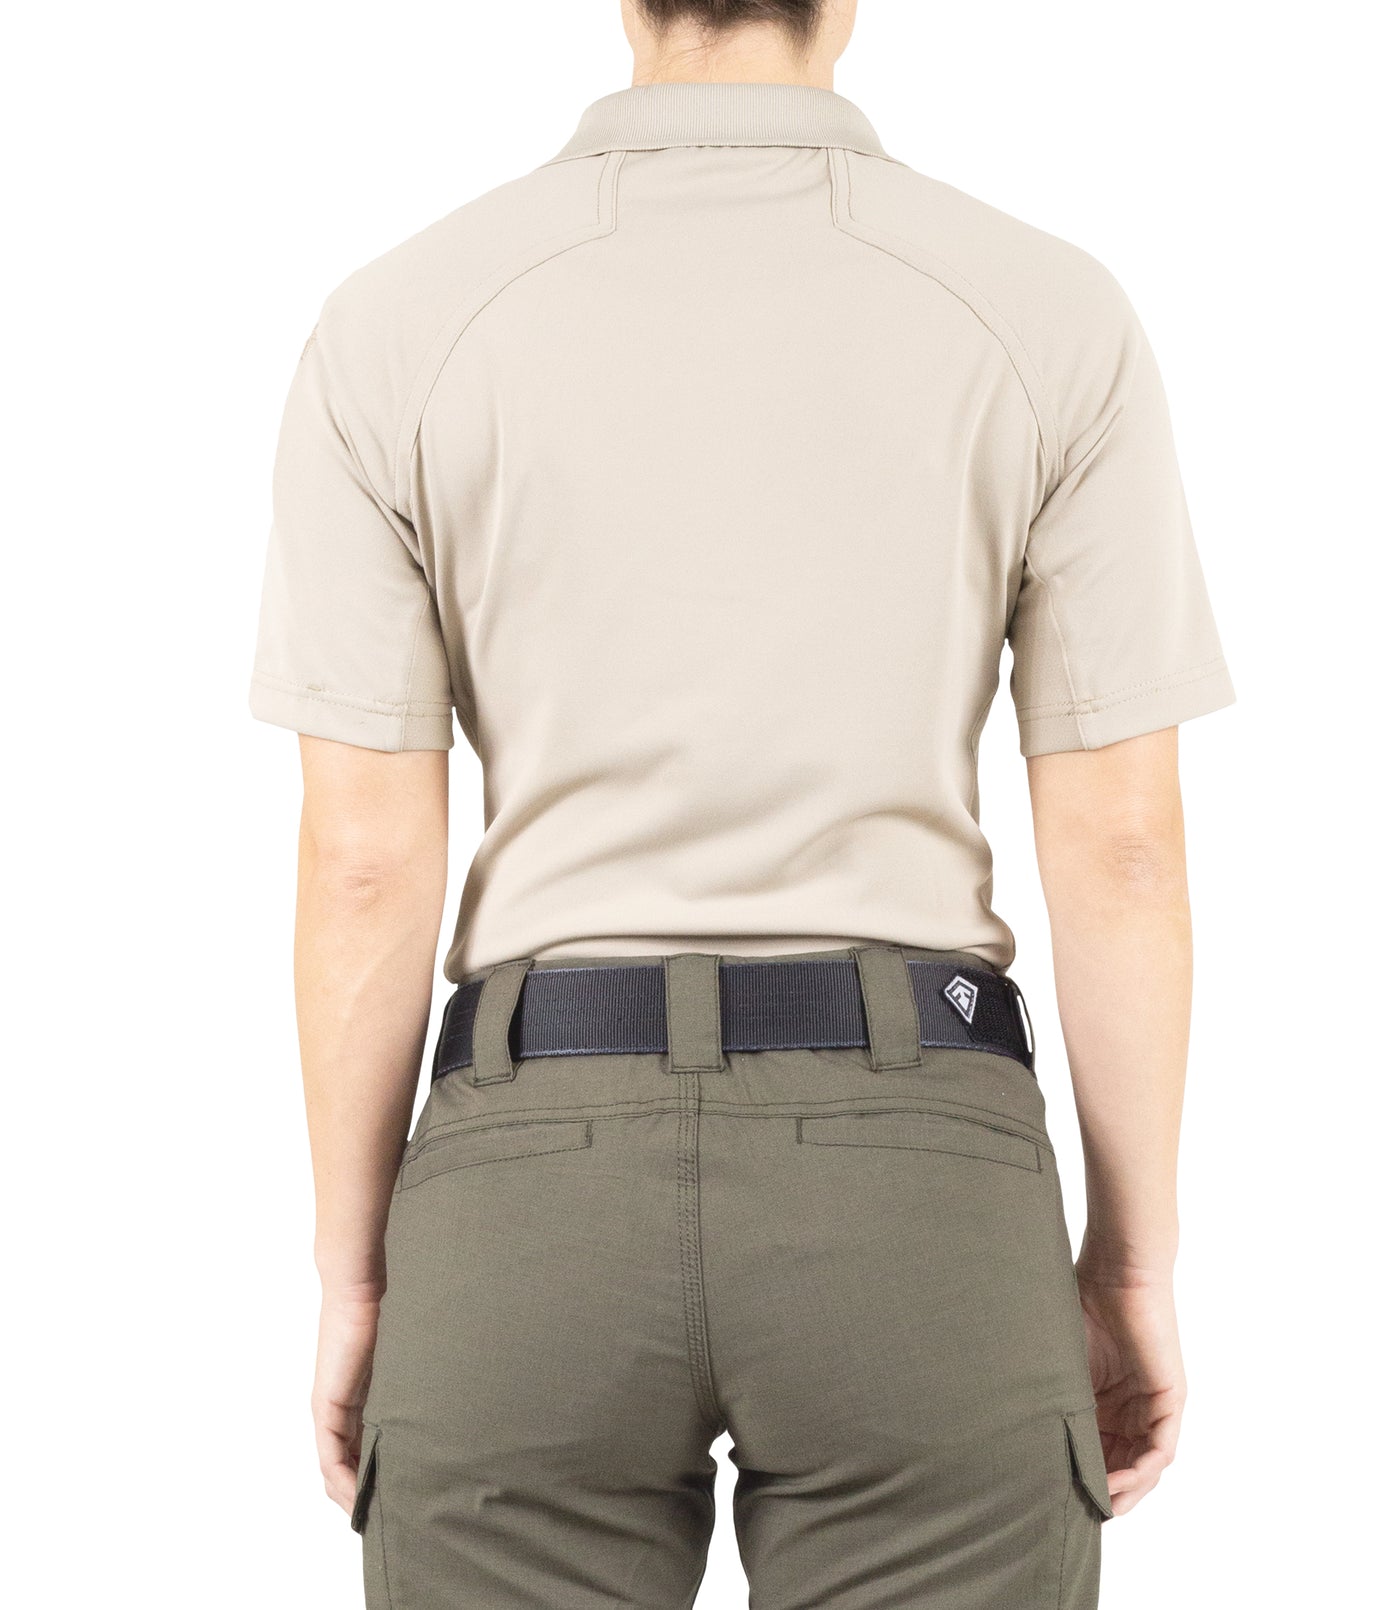 Back of Women's Performance Short Sleeve Polo in Silver Tan